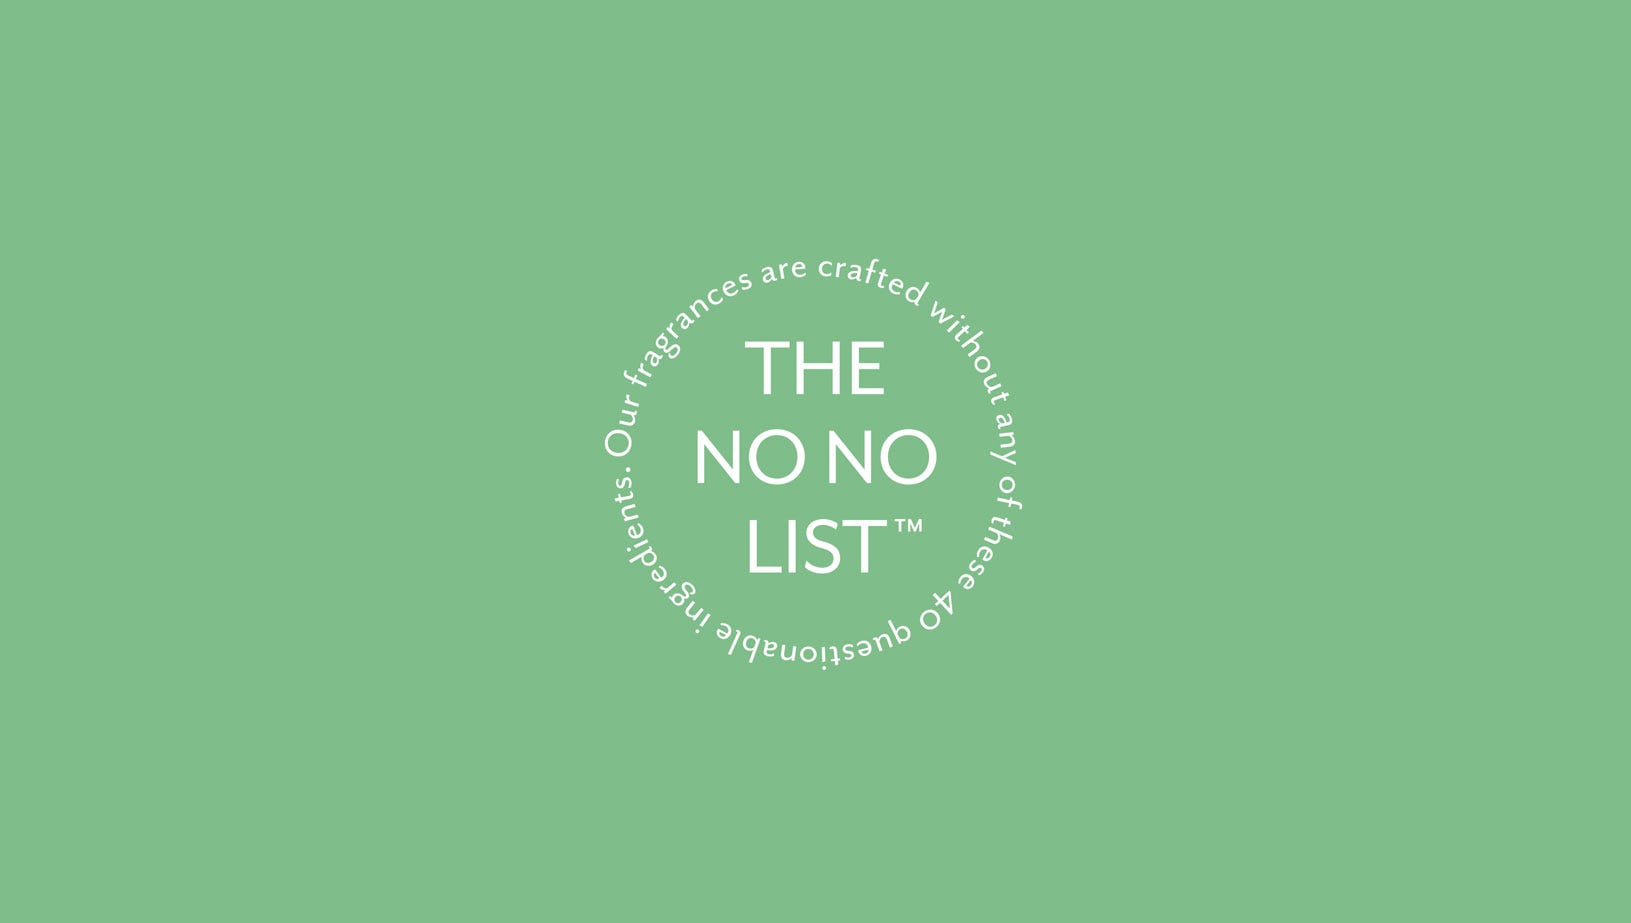 The NoNo List.  Our fragrances are crafted without any of these 40 questionable ingredients.